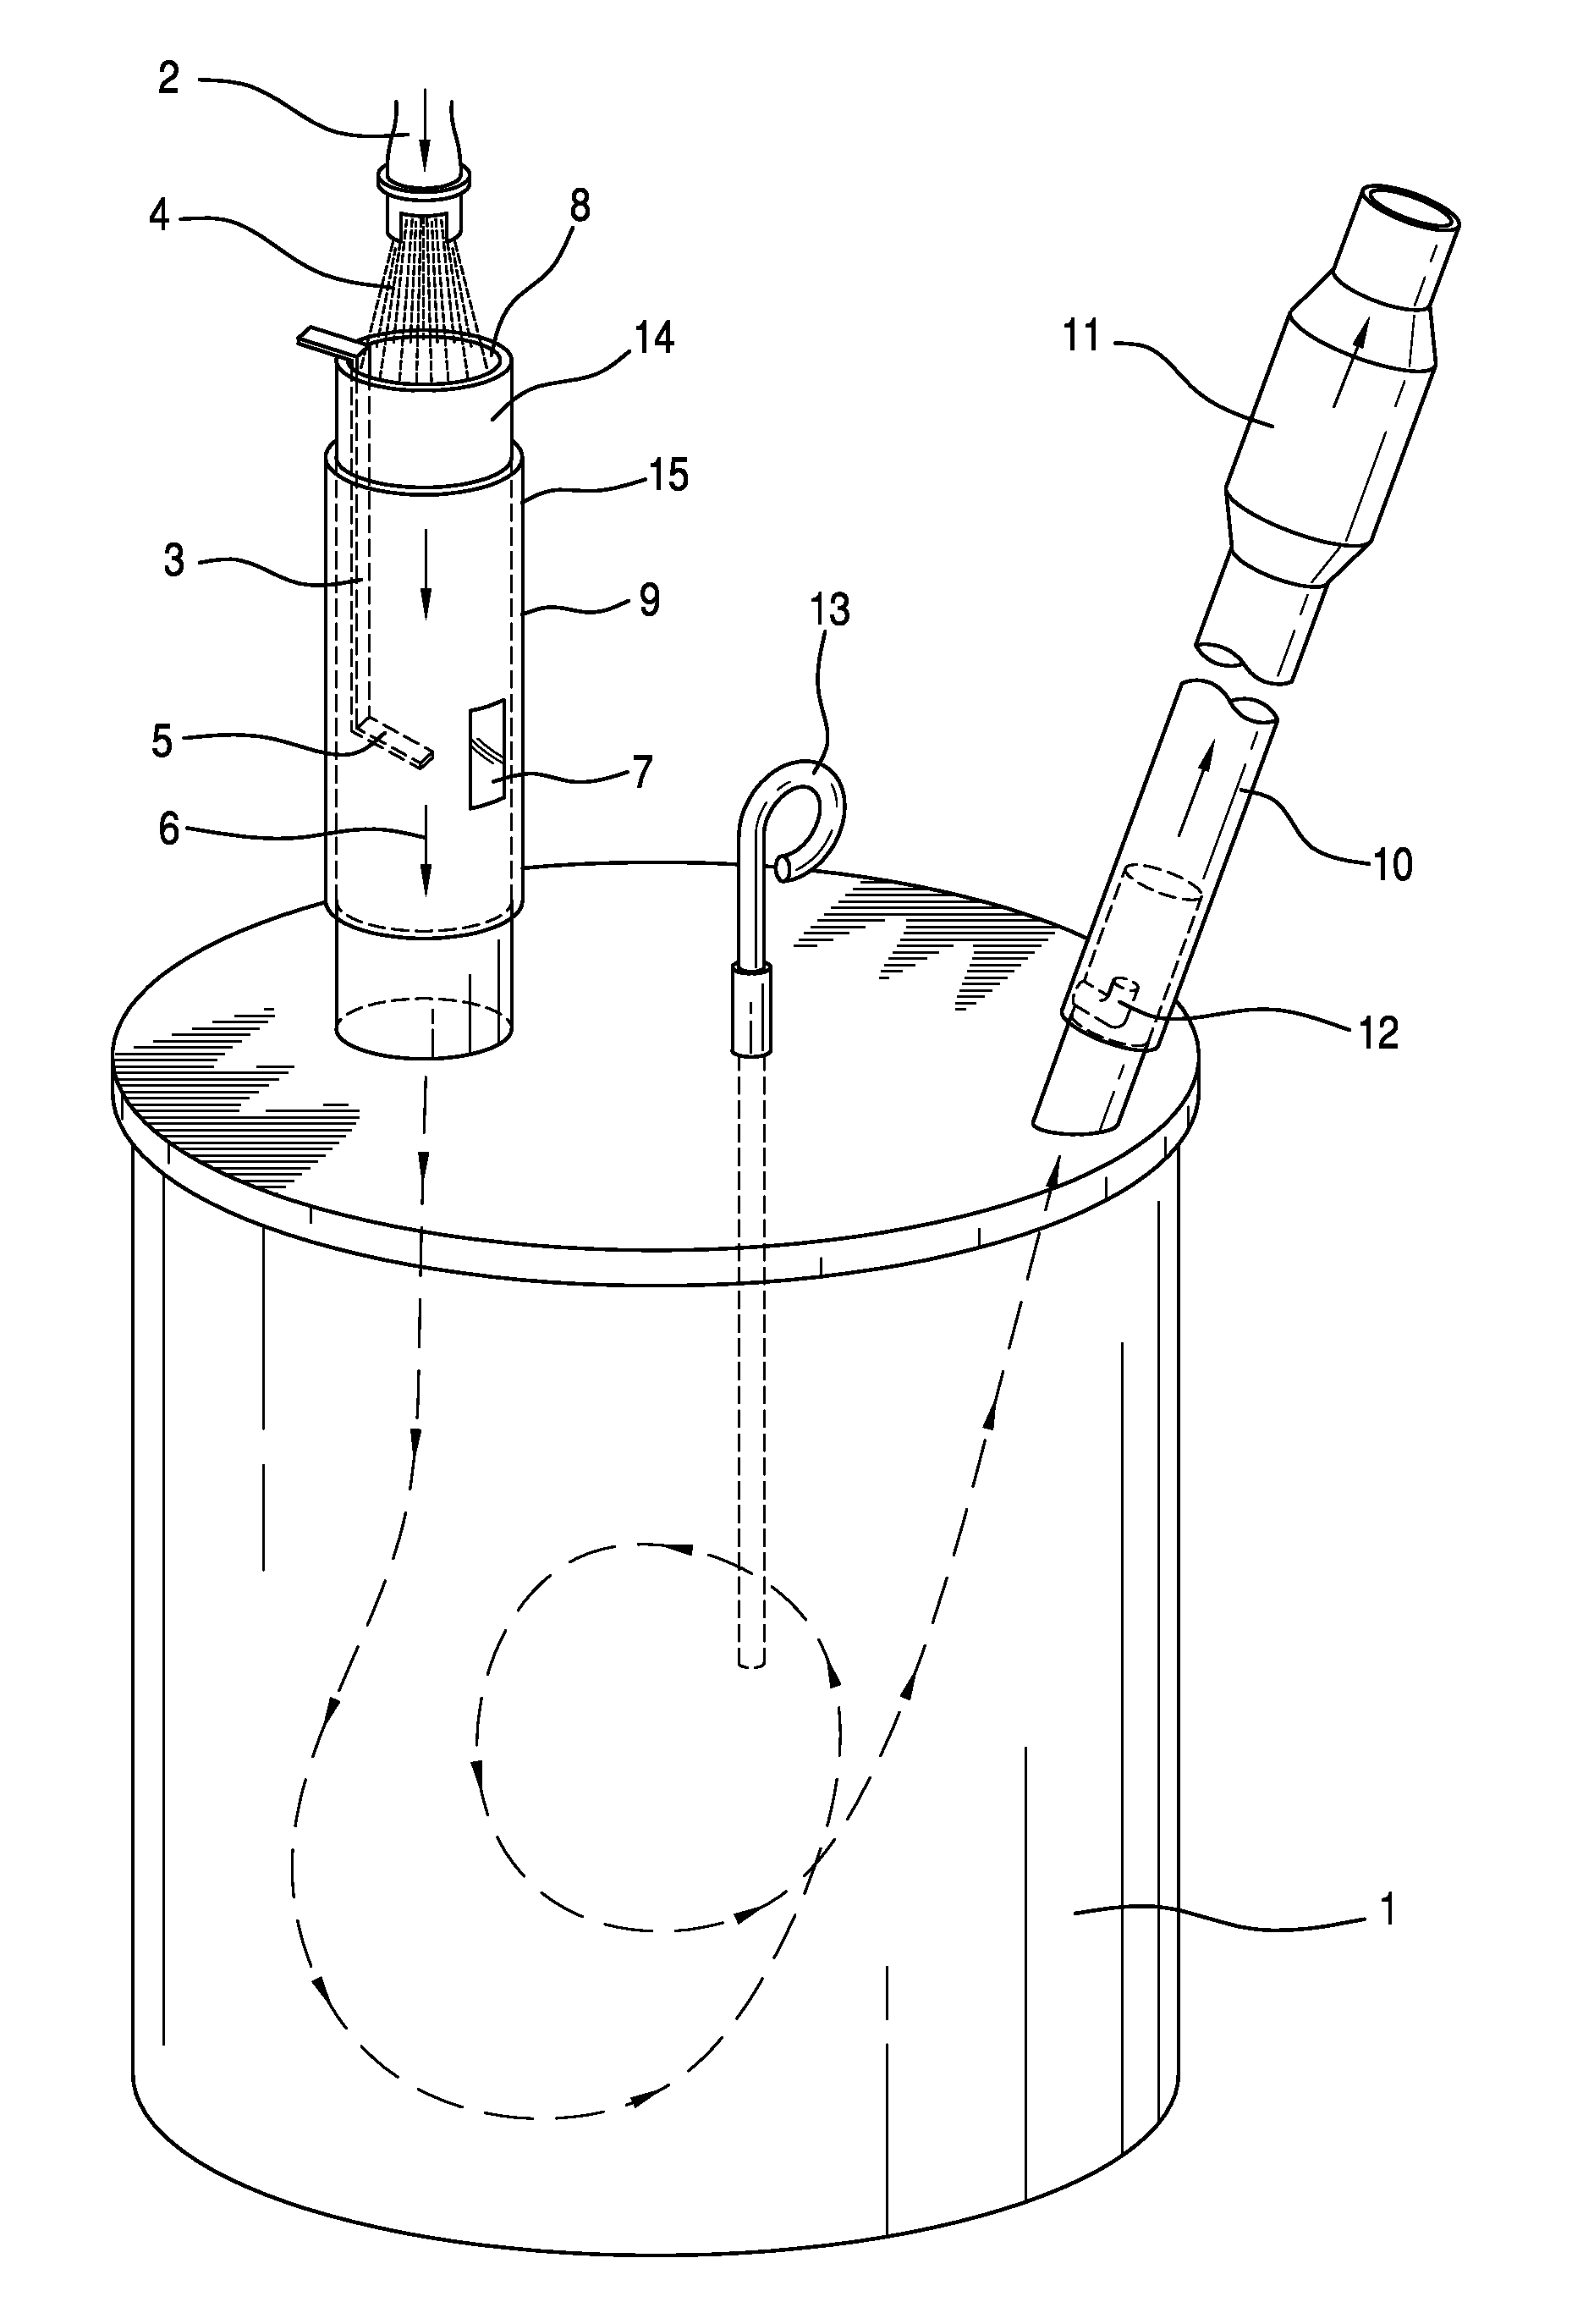 Device for collecting paint, lacquer and adhesive residues out of paint, lacquer, and adhesive guns, particularly guns connectable to a hose